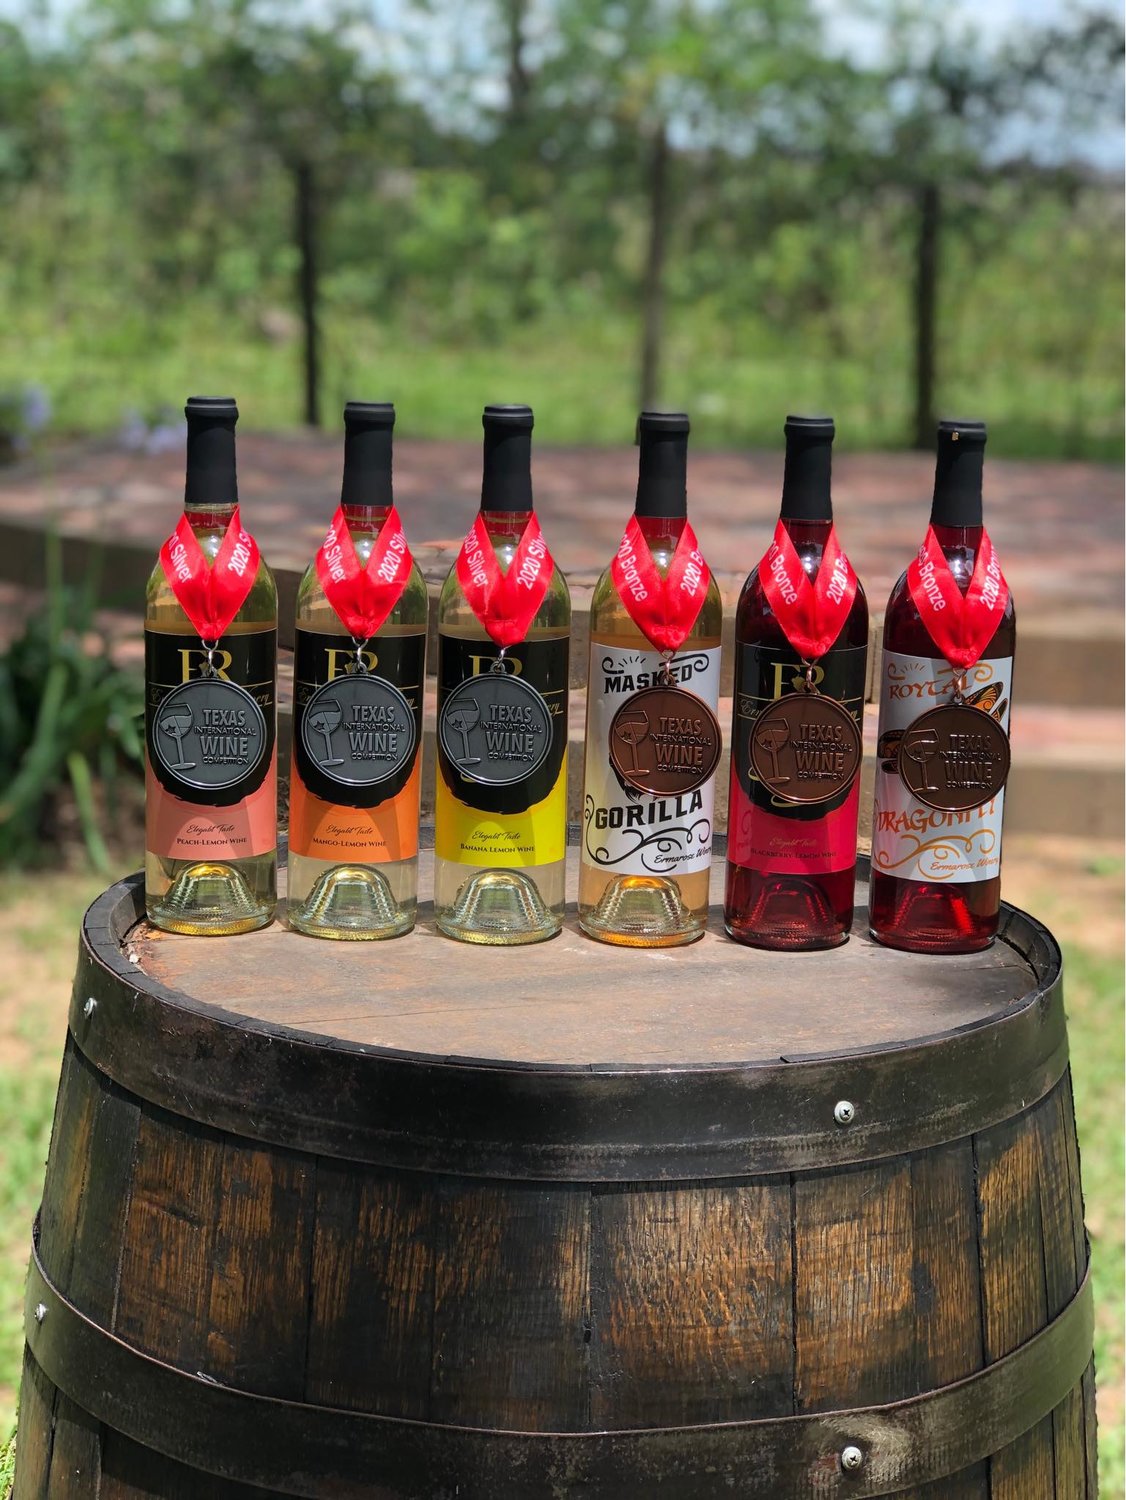 ErmaRose Winery makes an assortment of wines that have won awards.